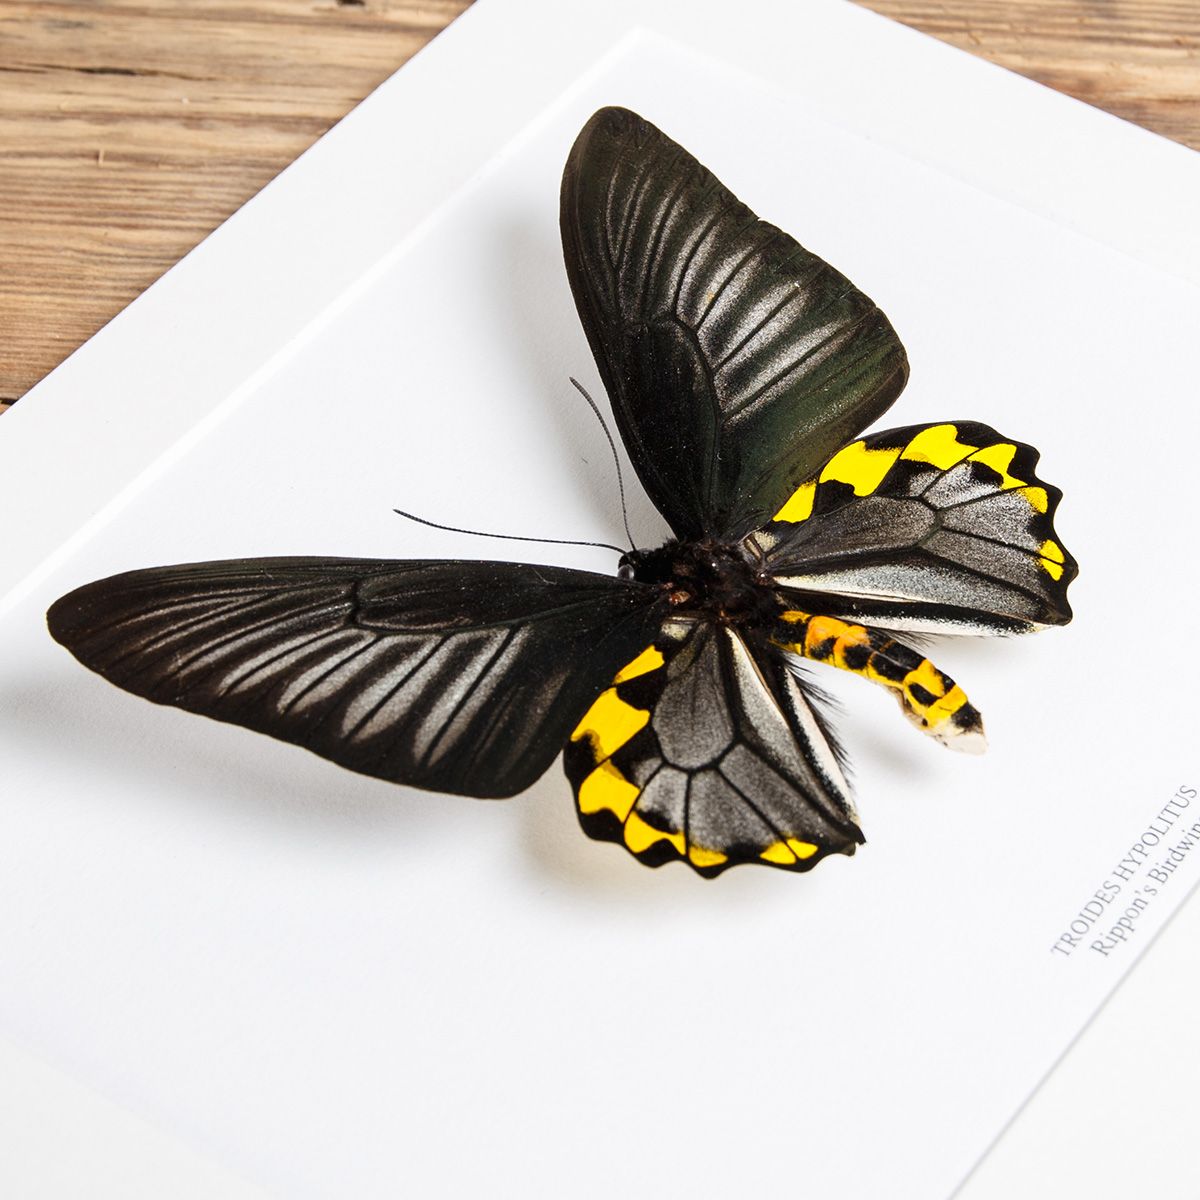 Male Rippons Birdwing in Box Frame (Troides hypolitus)